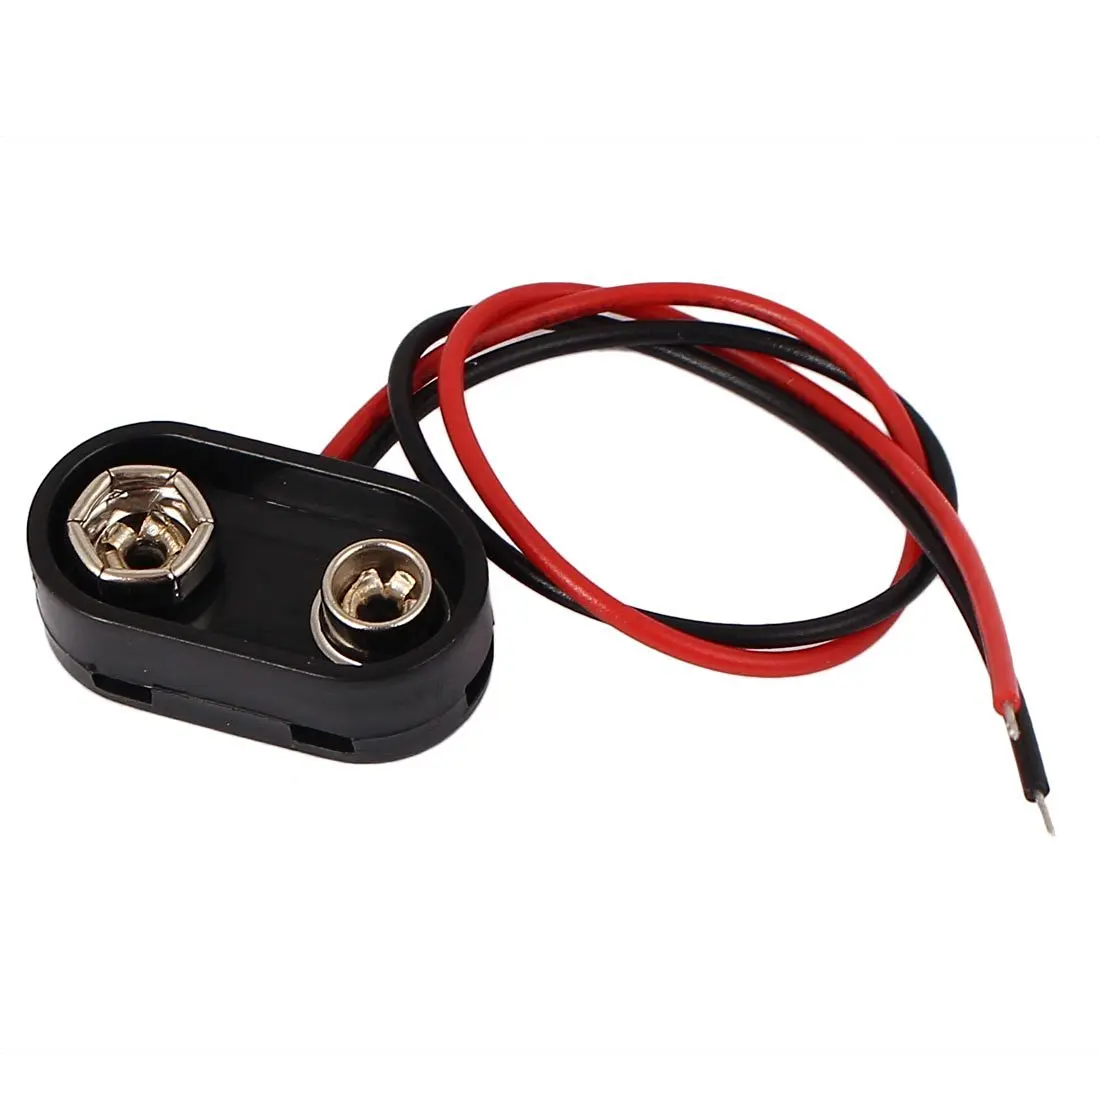 3 volt battery holder with switch